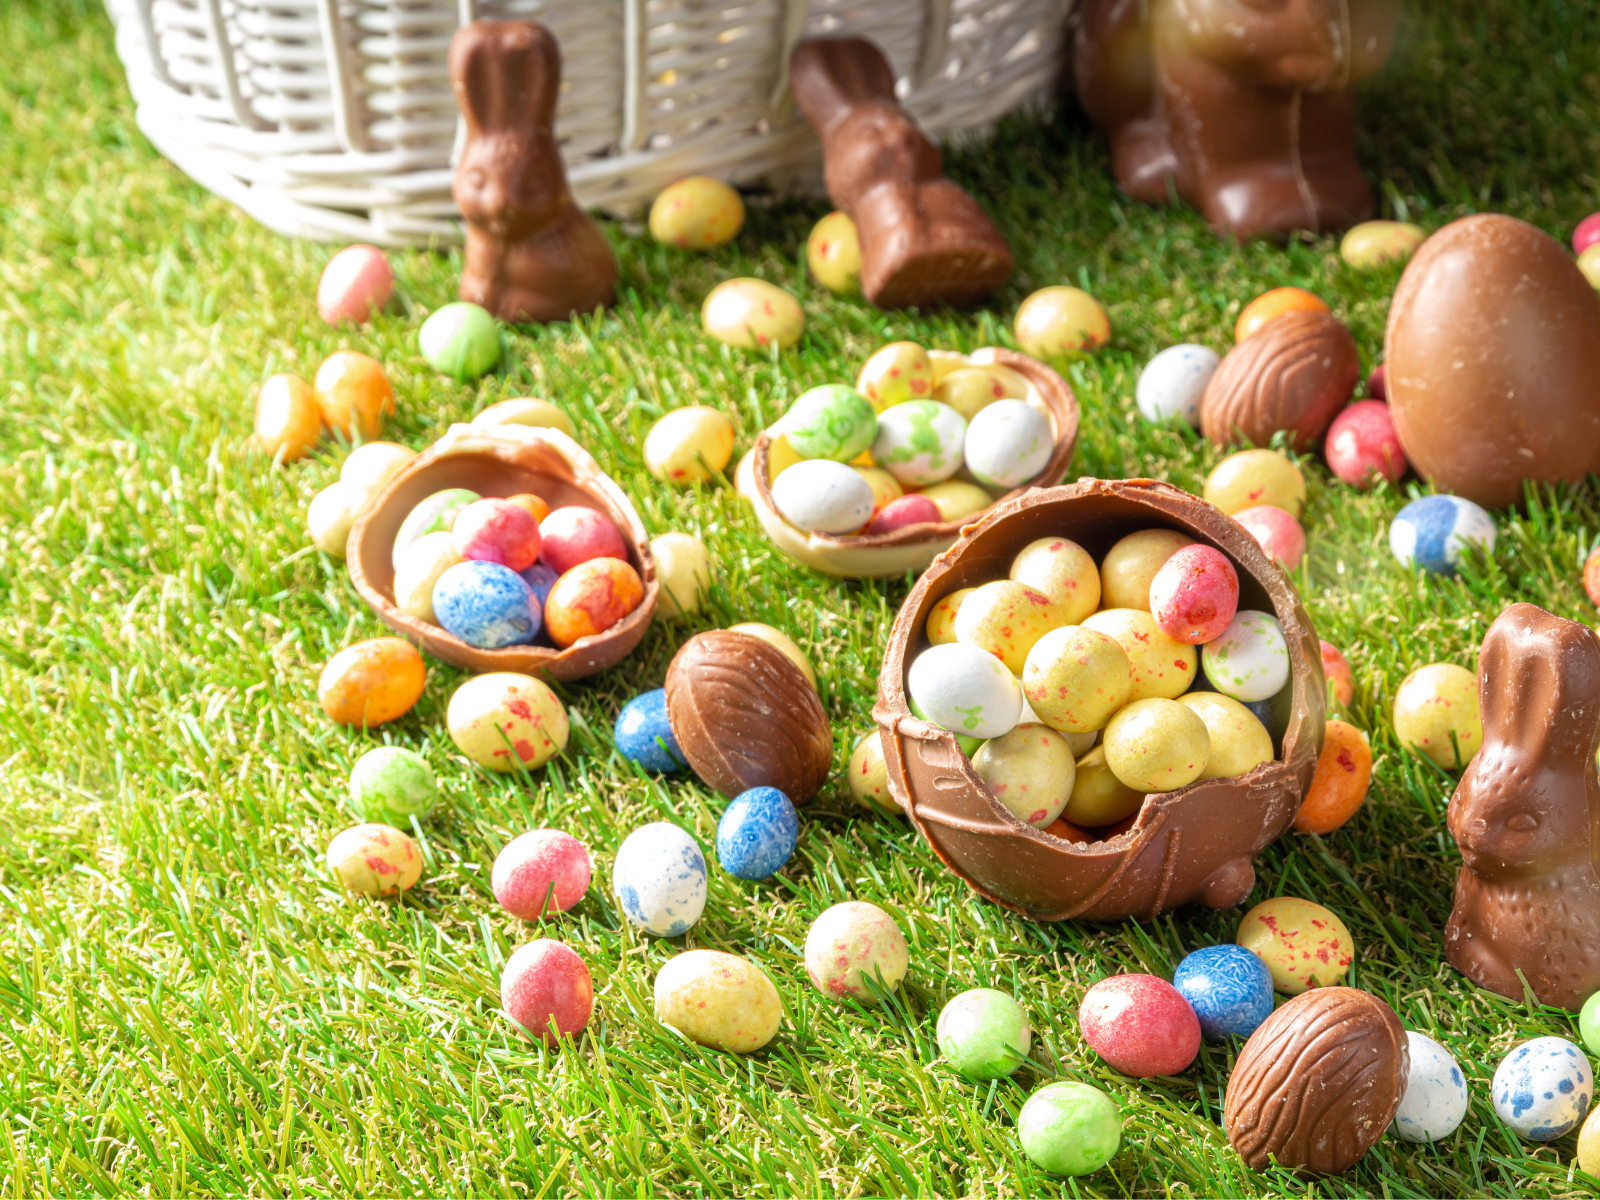 23rd March - Easter Extravaganza at Overnewton Castle